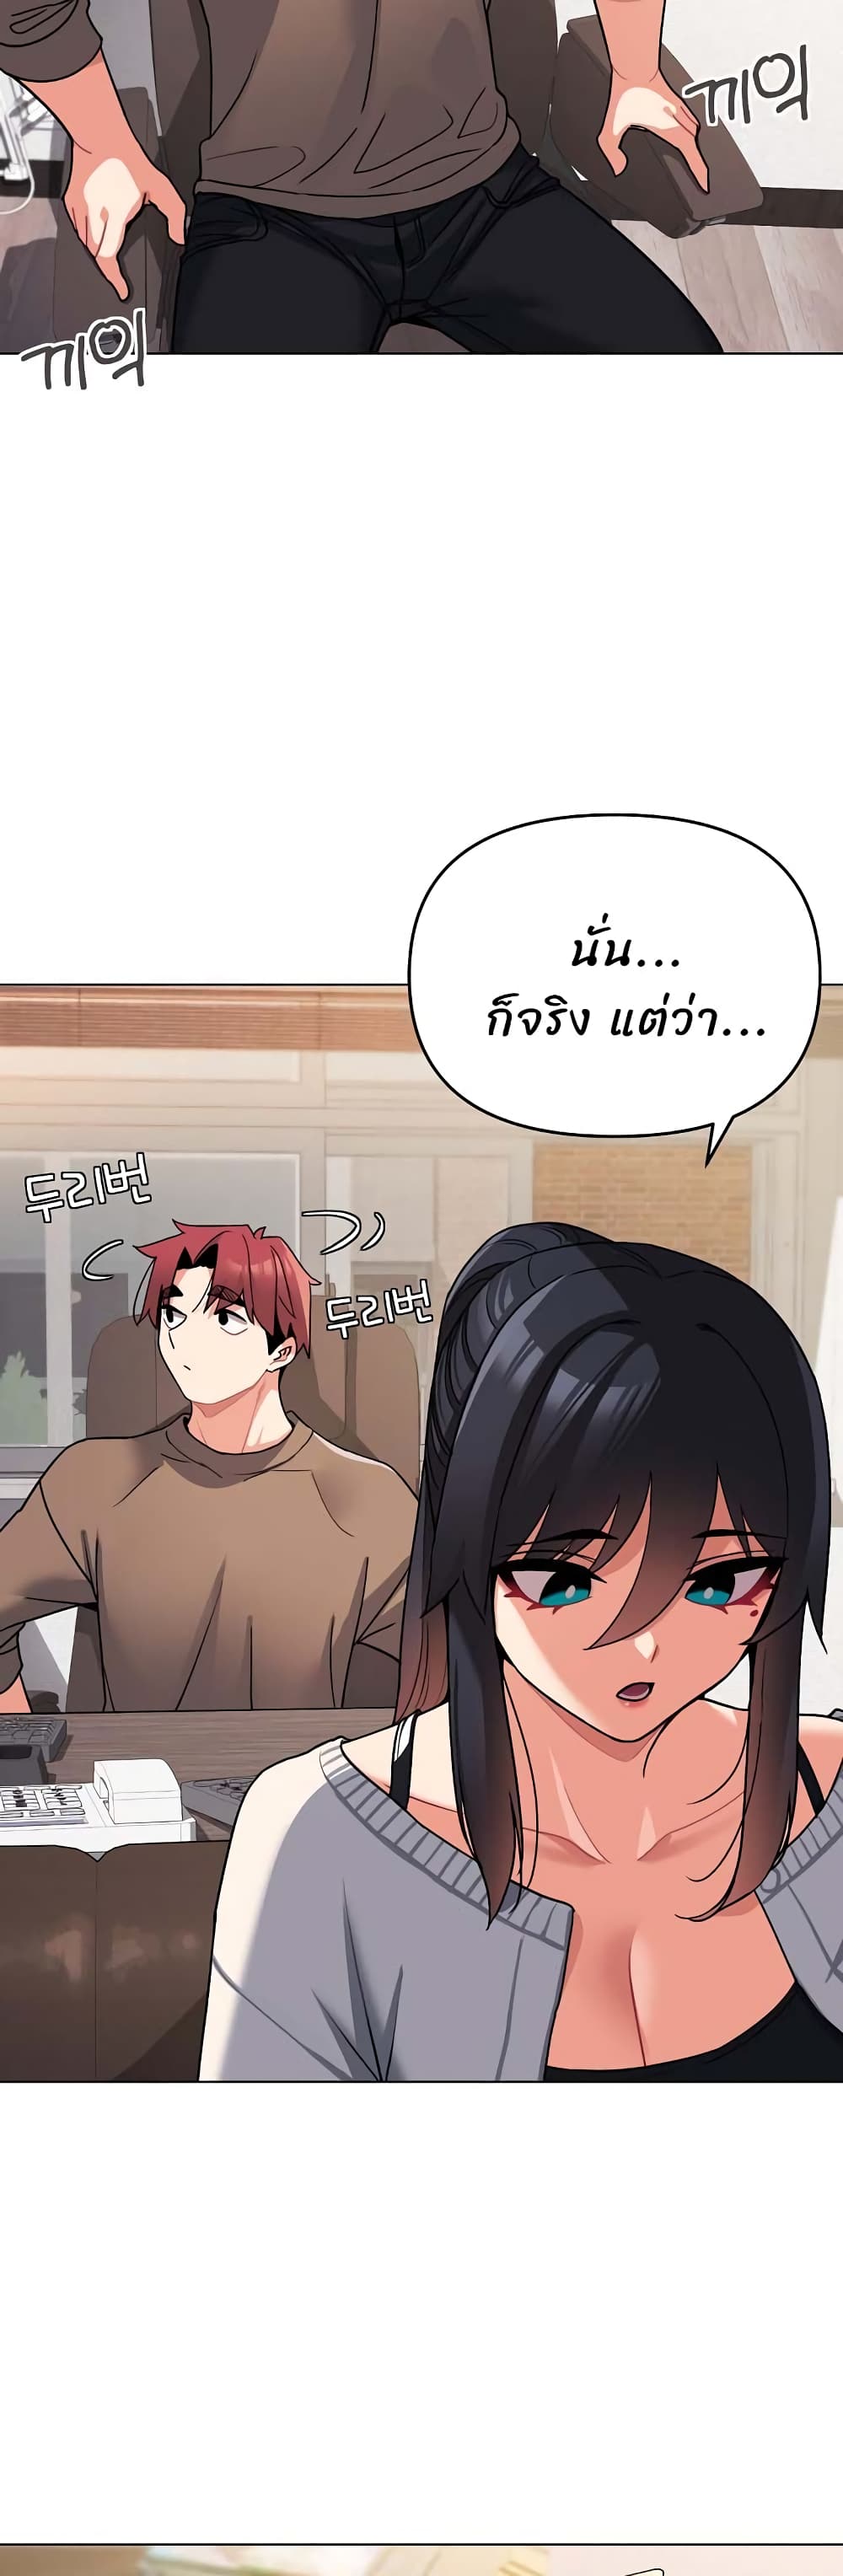 College Life Starts With Clubs 61 ภาพที่ 4